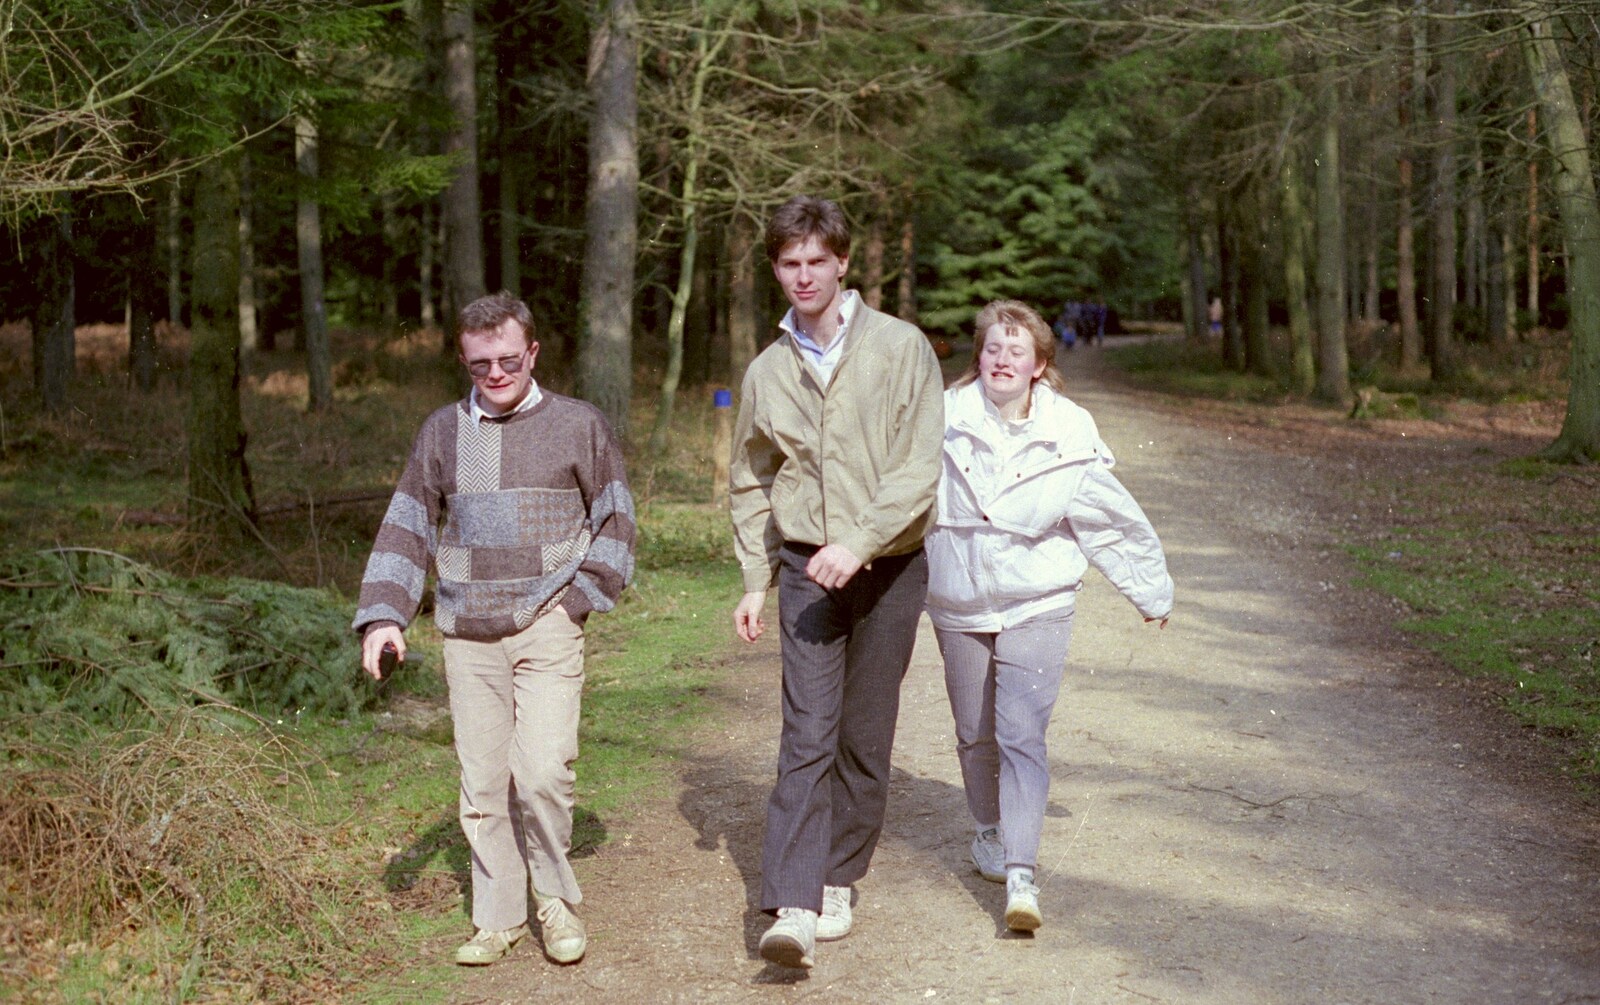 Hamish, Sean and Maria in the New Forest from A Walk in the New Forest, Hampshire - 27th July 1989